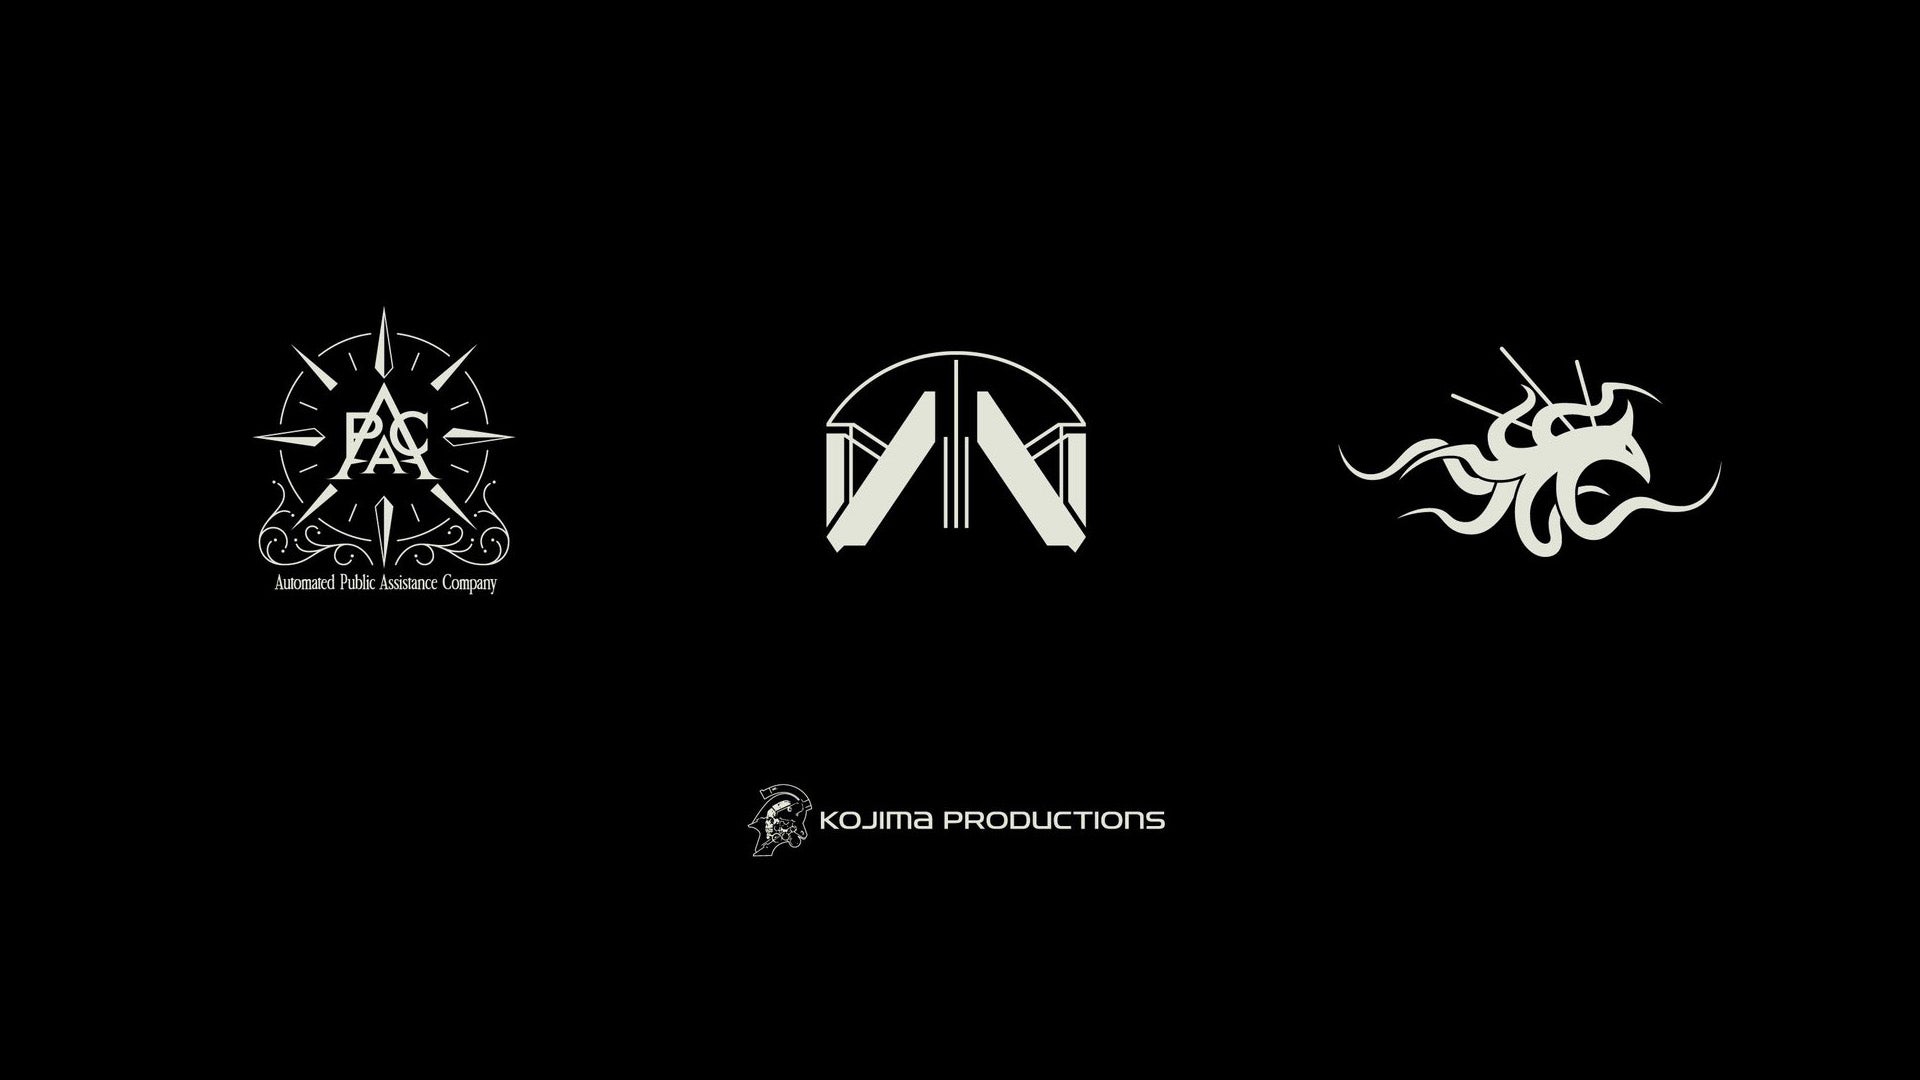 Image for Hideo Kojima can't help but tease his next game, this time with some fancy logos